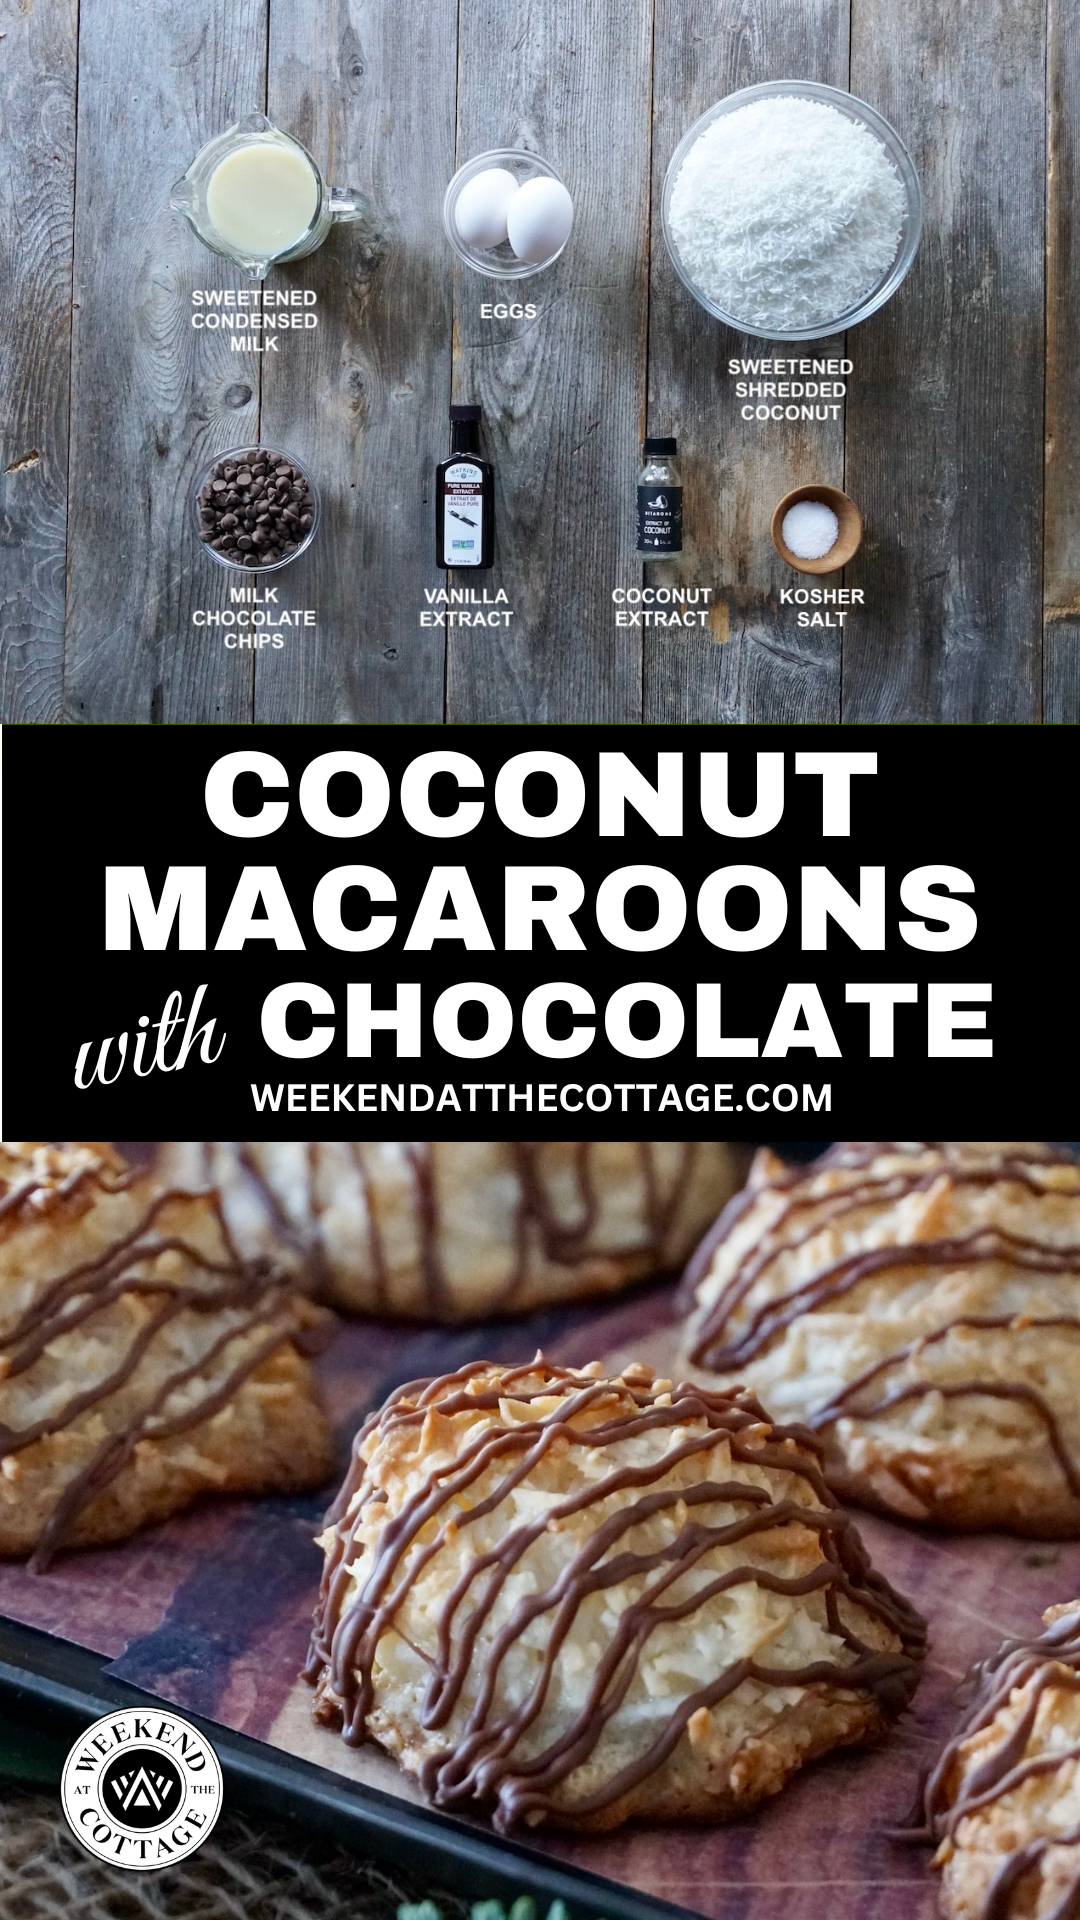 Coconut Macaroons with Chocolate